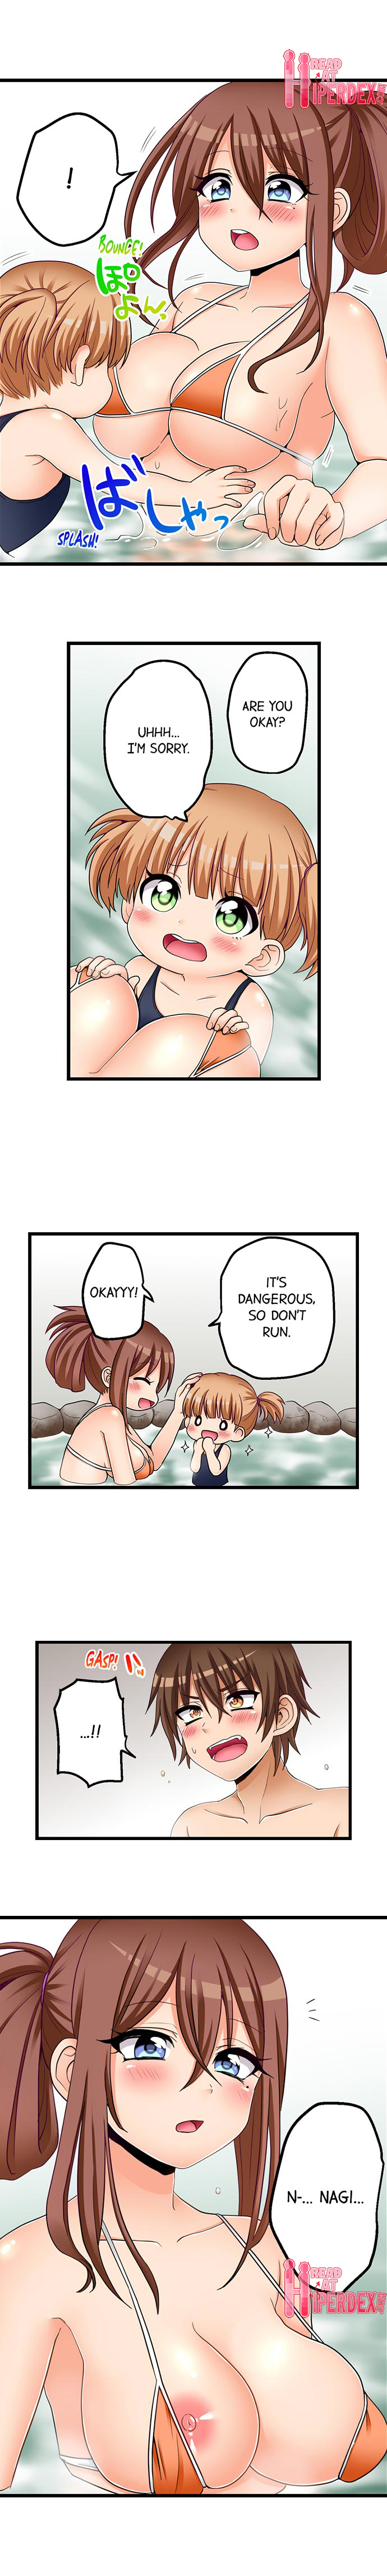 Taking a Hot Tanned Chick’s Virginity - Chapter 16 Page 7